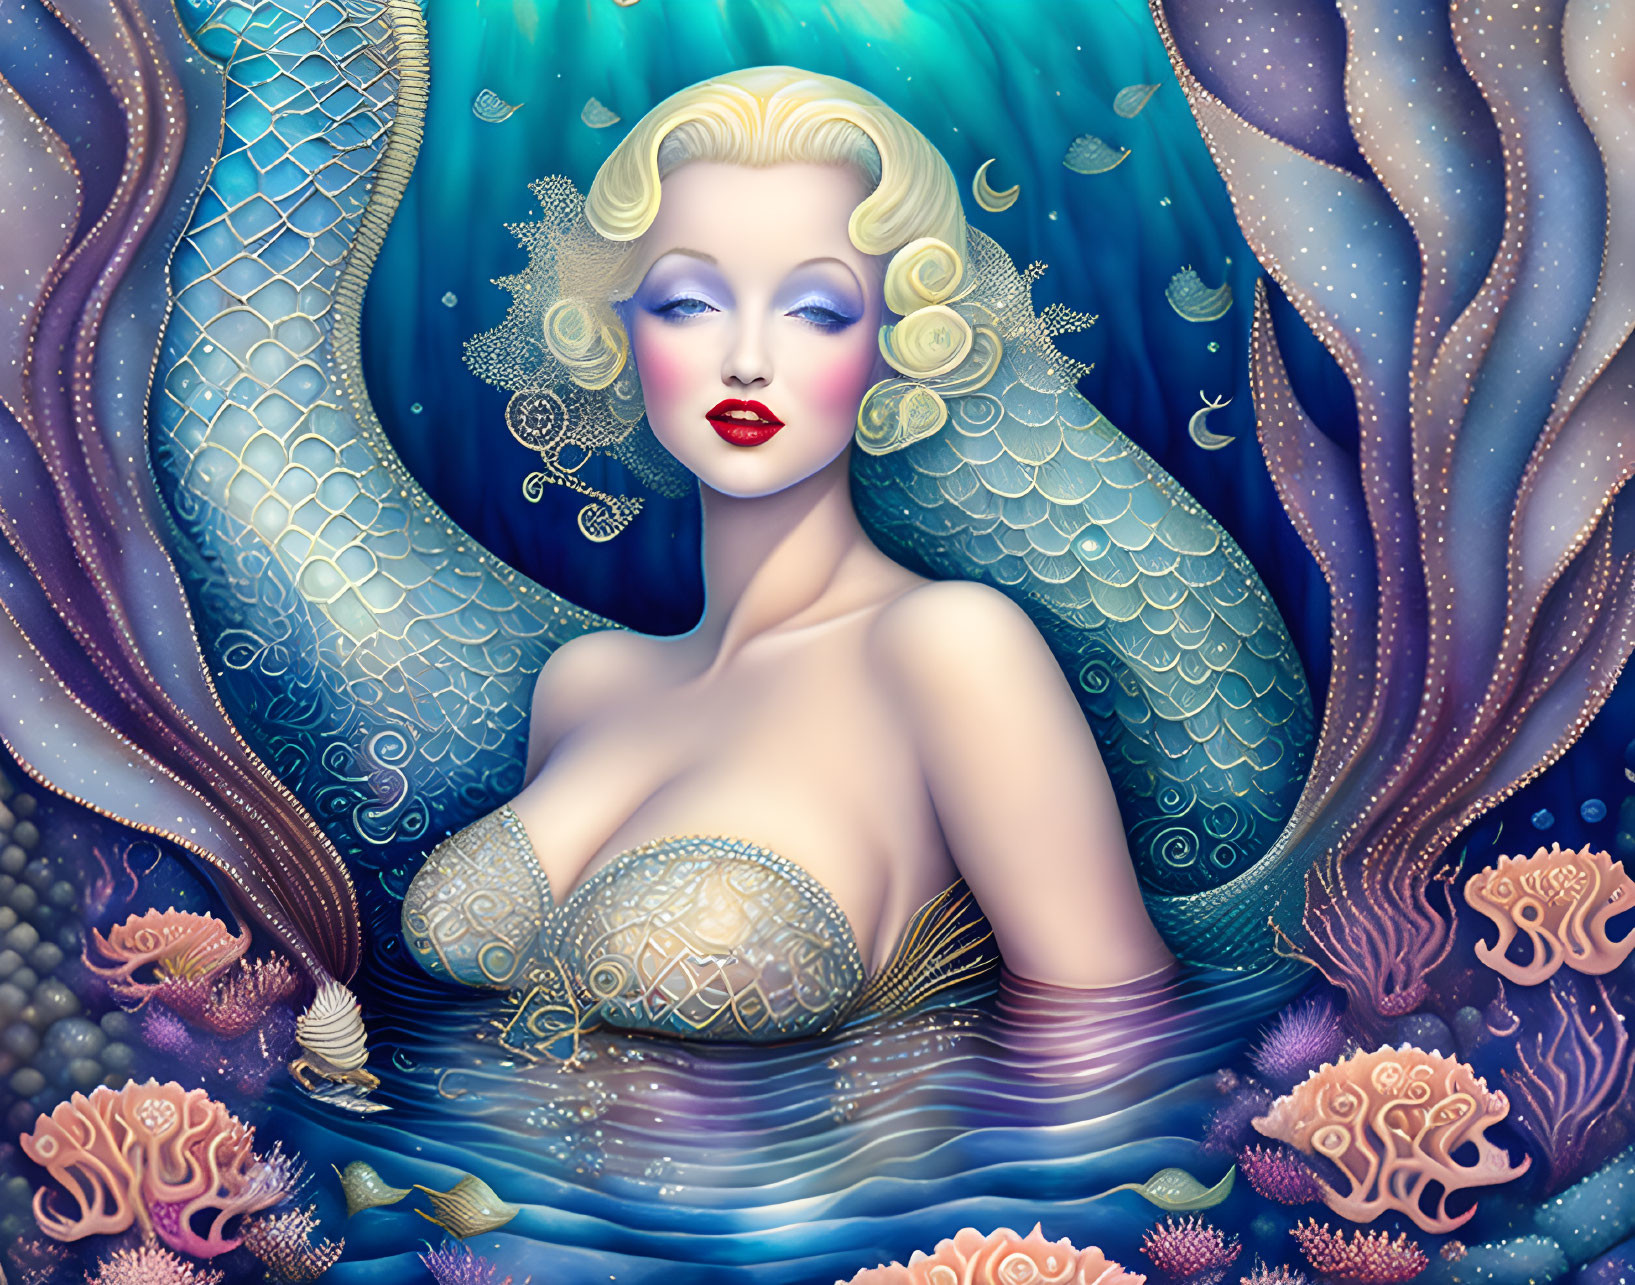 Mermaid illustration with blue hair, pearl bra, coral, and ocean motifs in art deco style